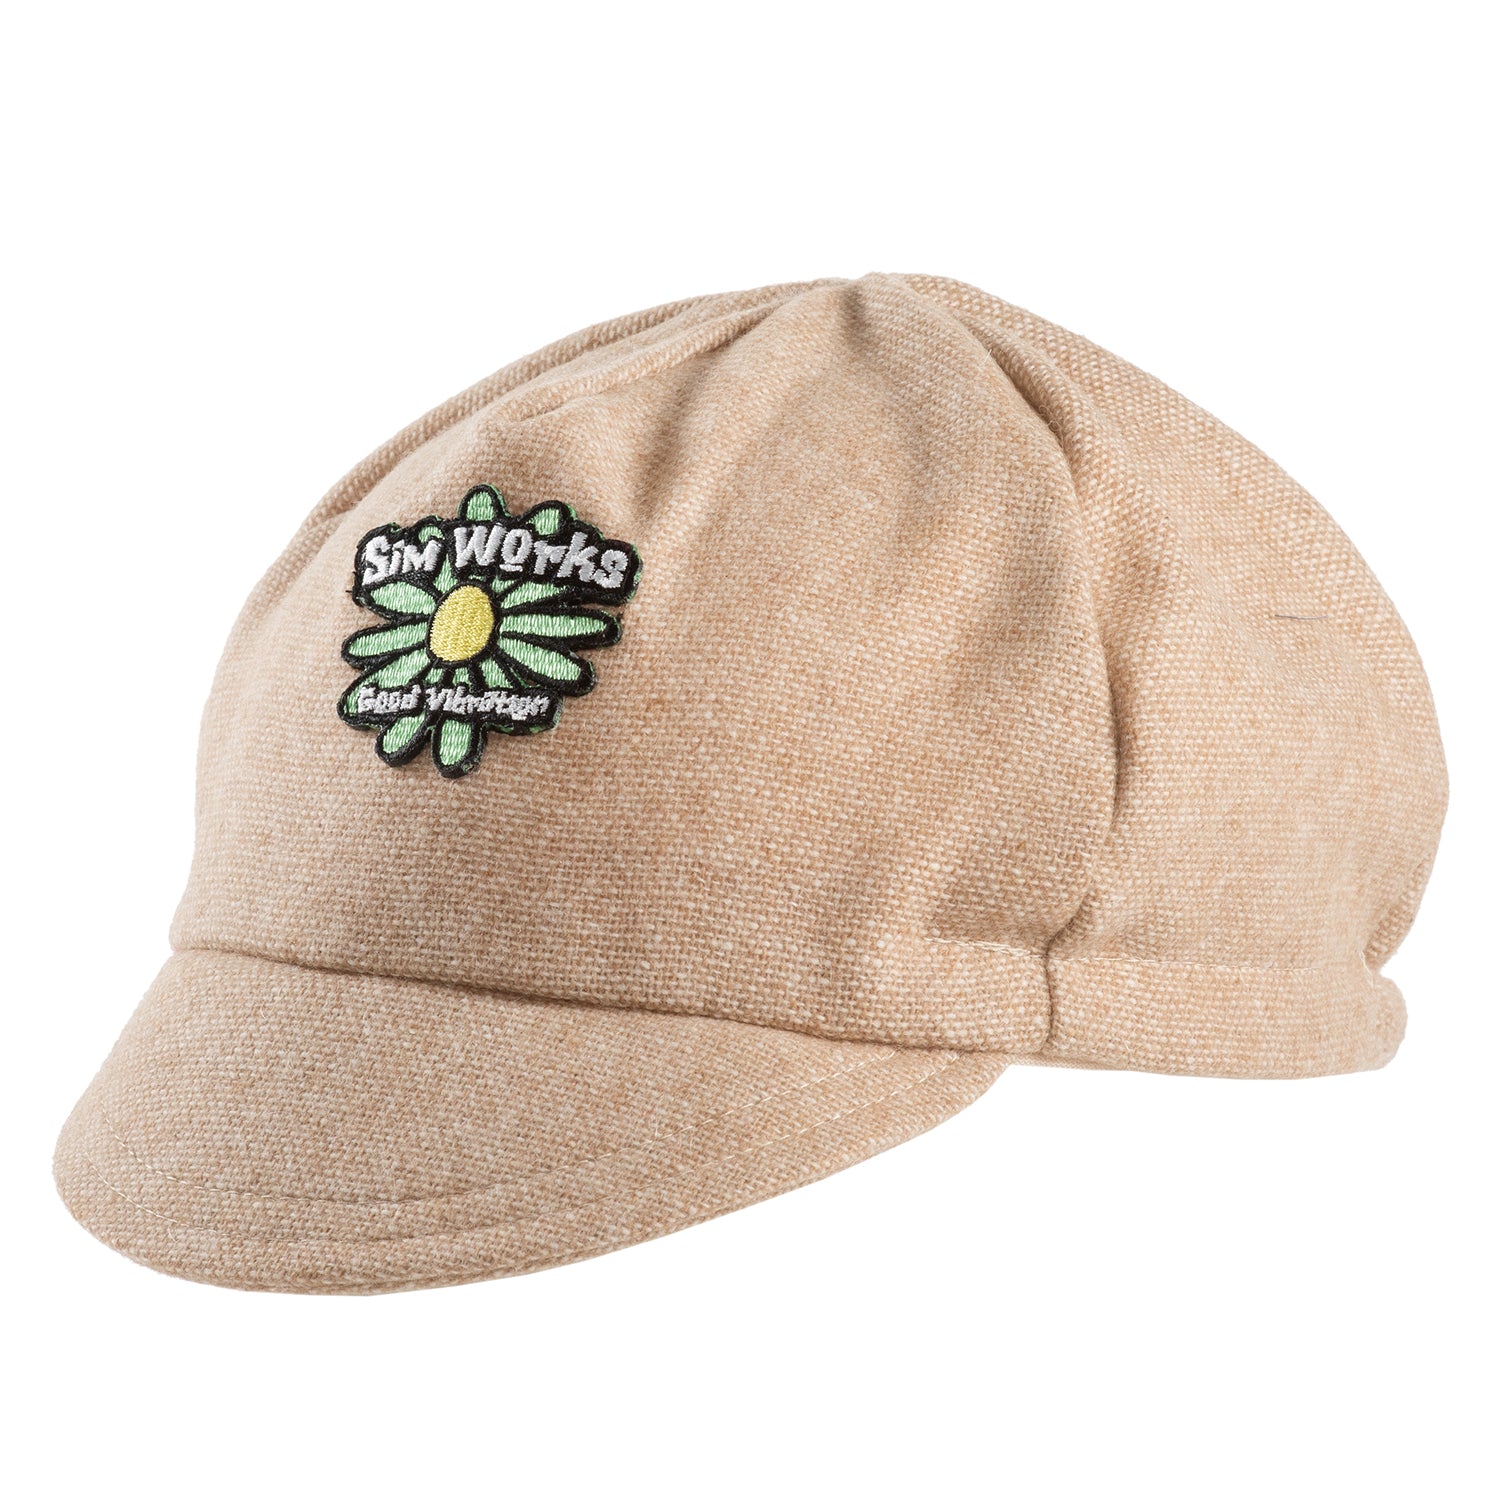 SimWorks by Welldone Special Wool Cycle Cap for Circles 17th Anniversary